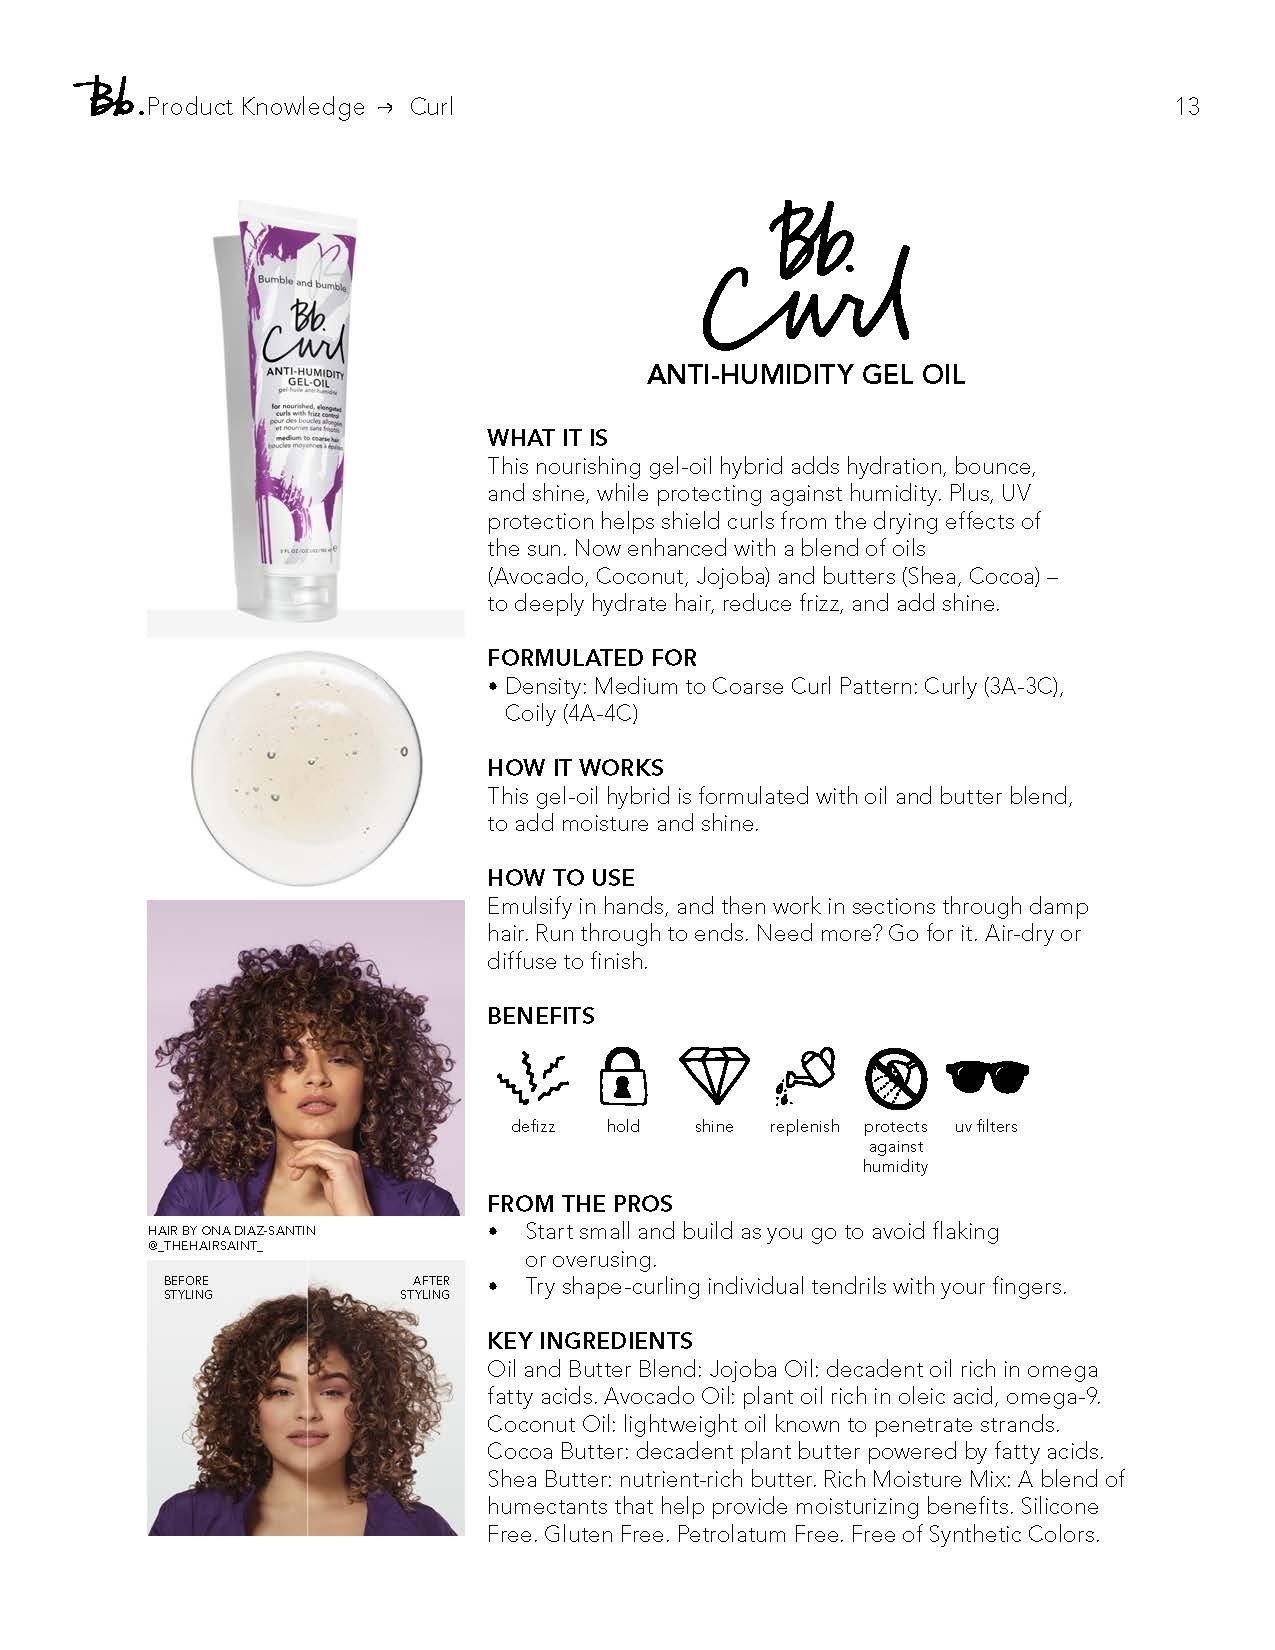 2021 Bumble Curl Collection PK Focus_Page_5.jpg